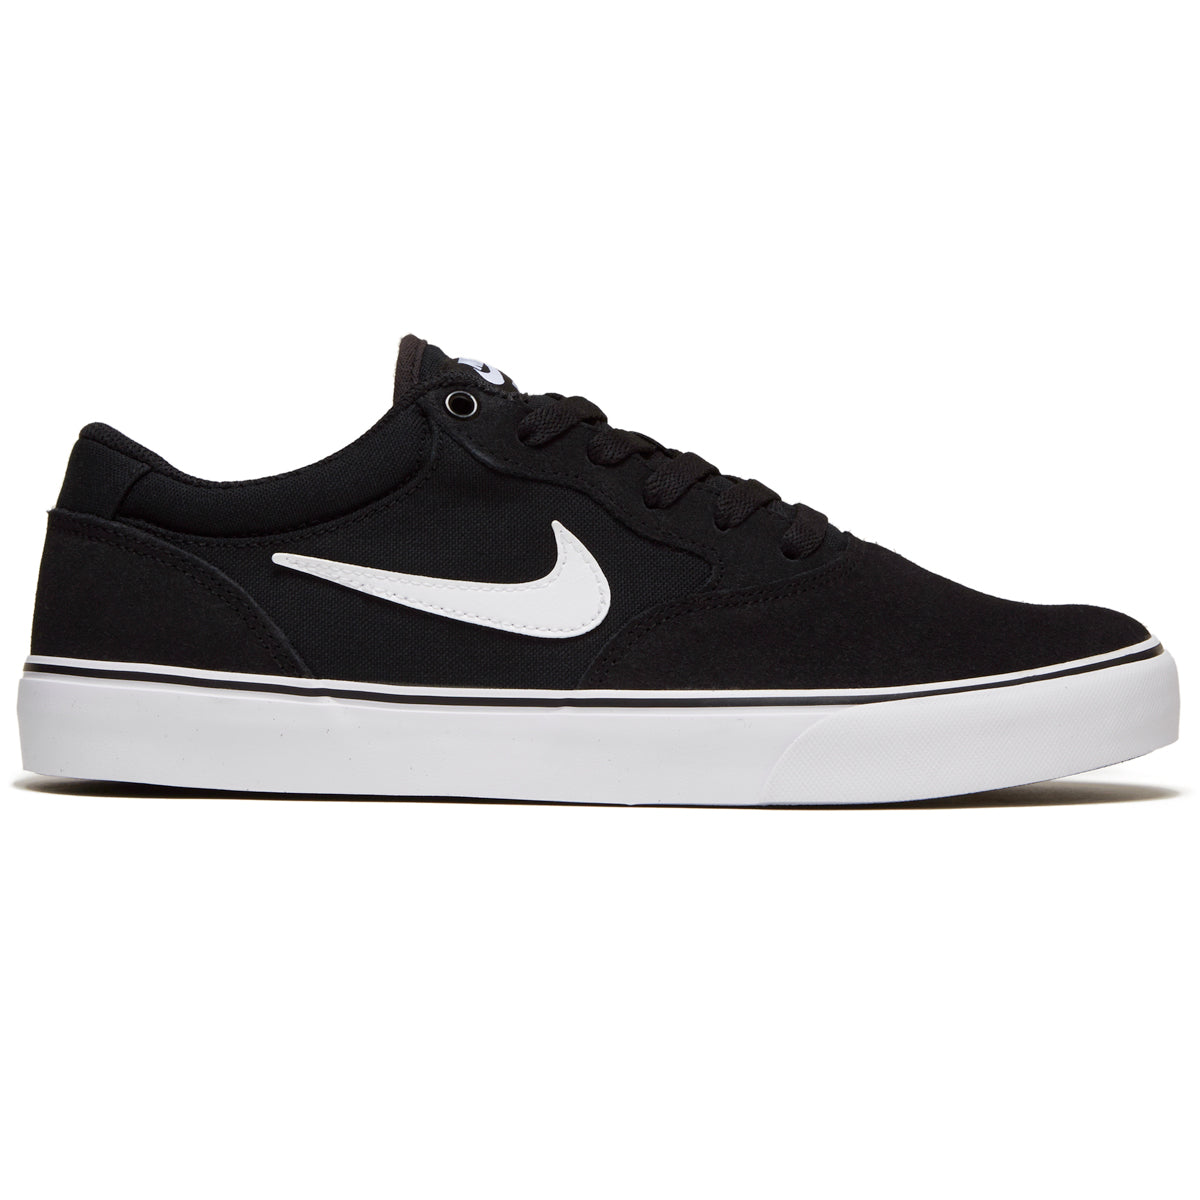 Nike SB Chron 2 Shoes: Revamped Style and Comfort – CCS